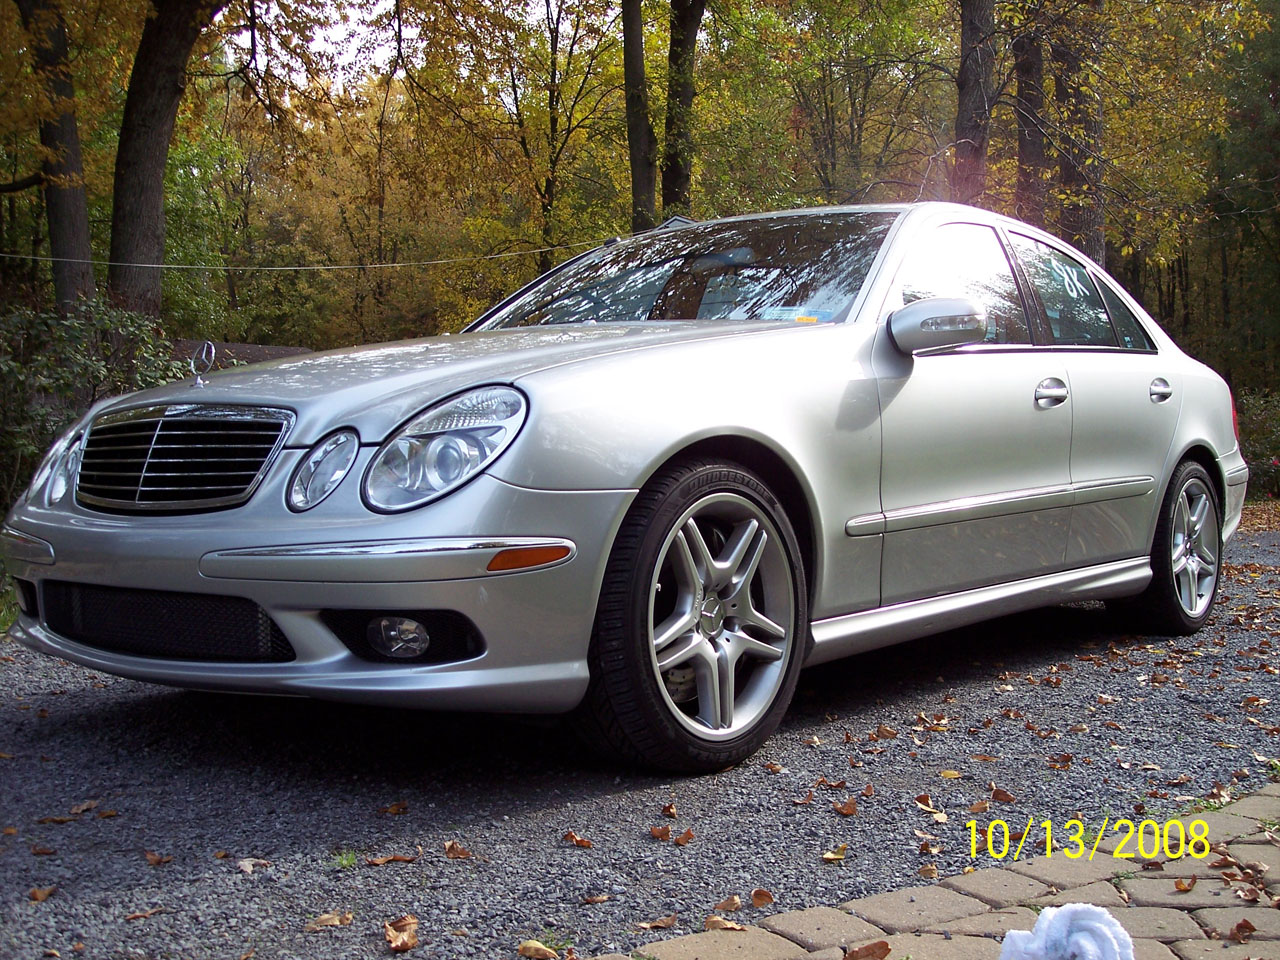  2003 Mercedes-Benz E55 AMG LET Stage 1